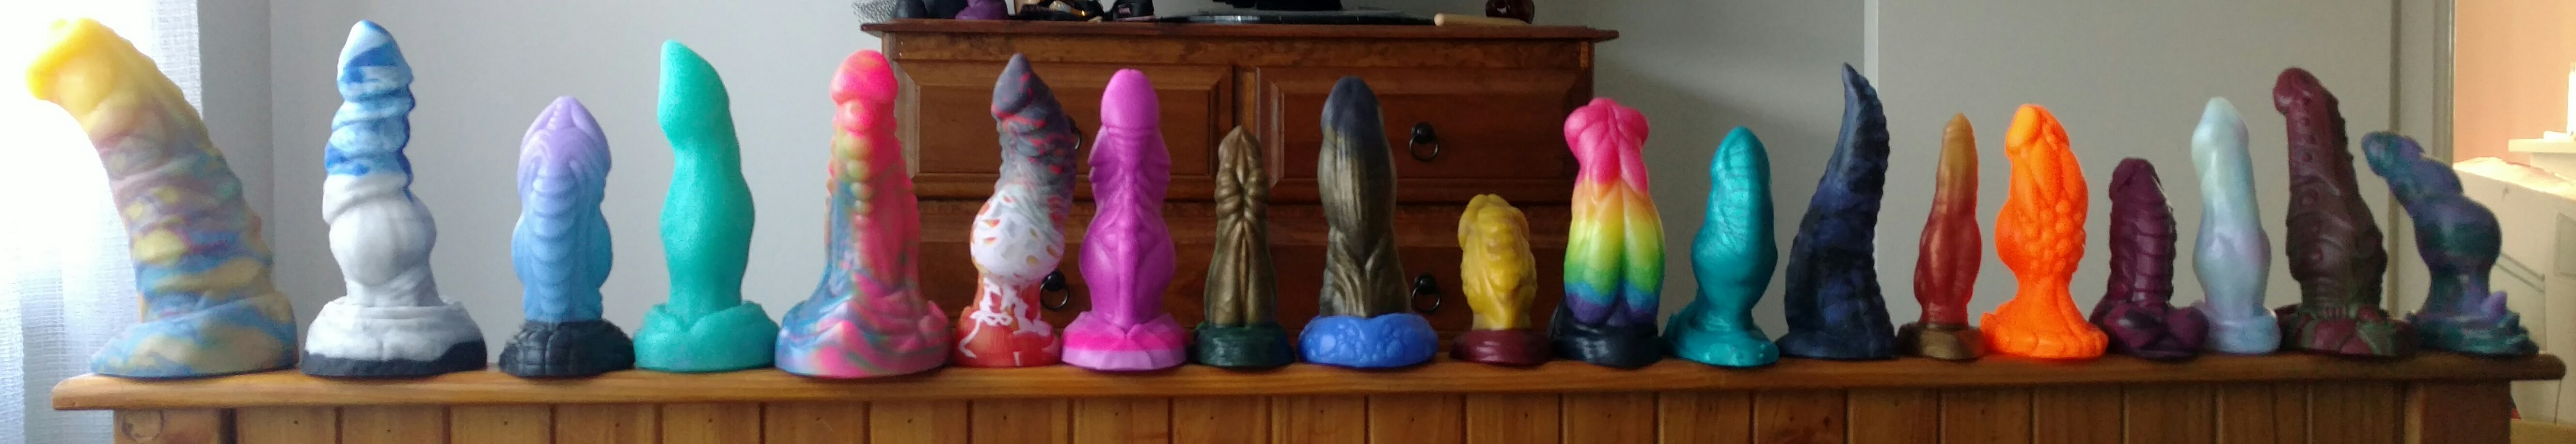 Have you Heard of Bad Dragon? 